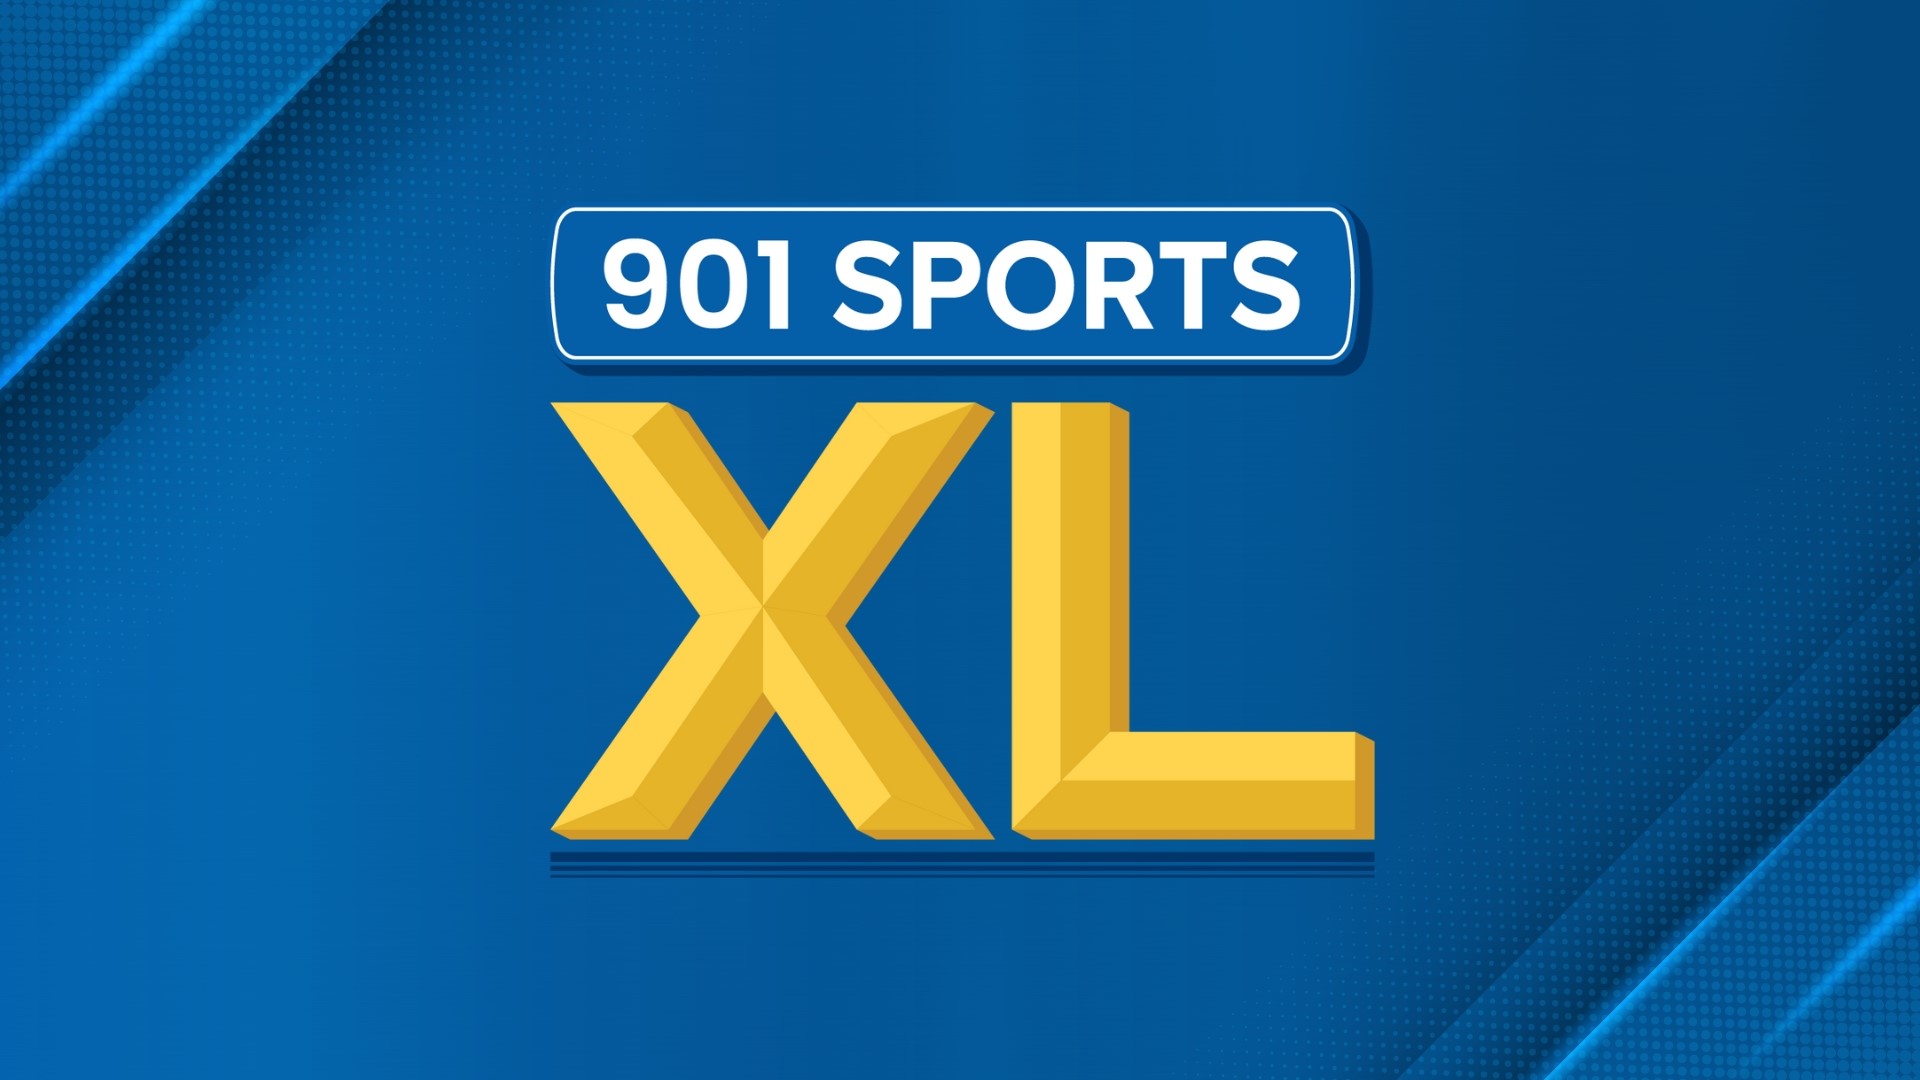 901 Sports XL features all the Mid-South sports news from your favorite Memphis-area teams, with deep-dives into Memphis Grizzlies and Memphis Tigers topics